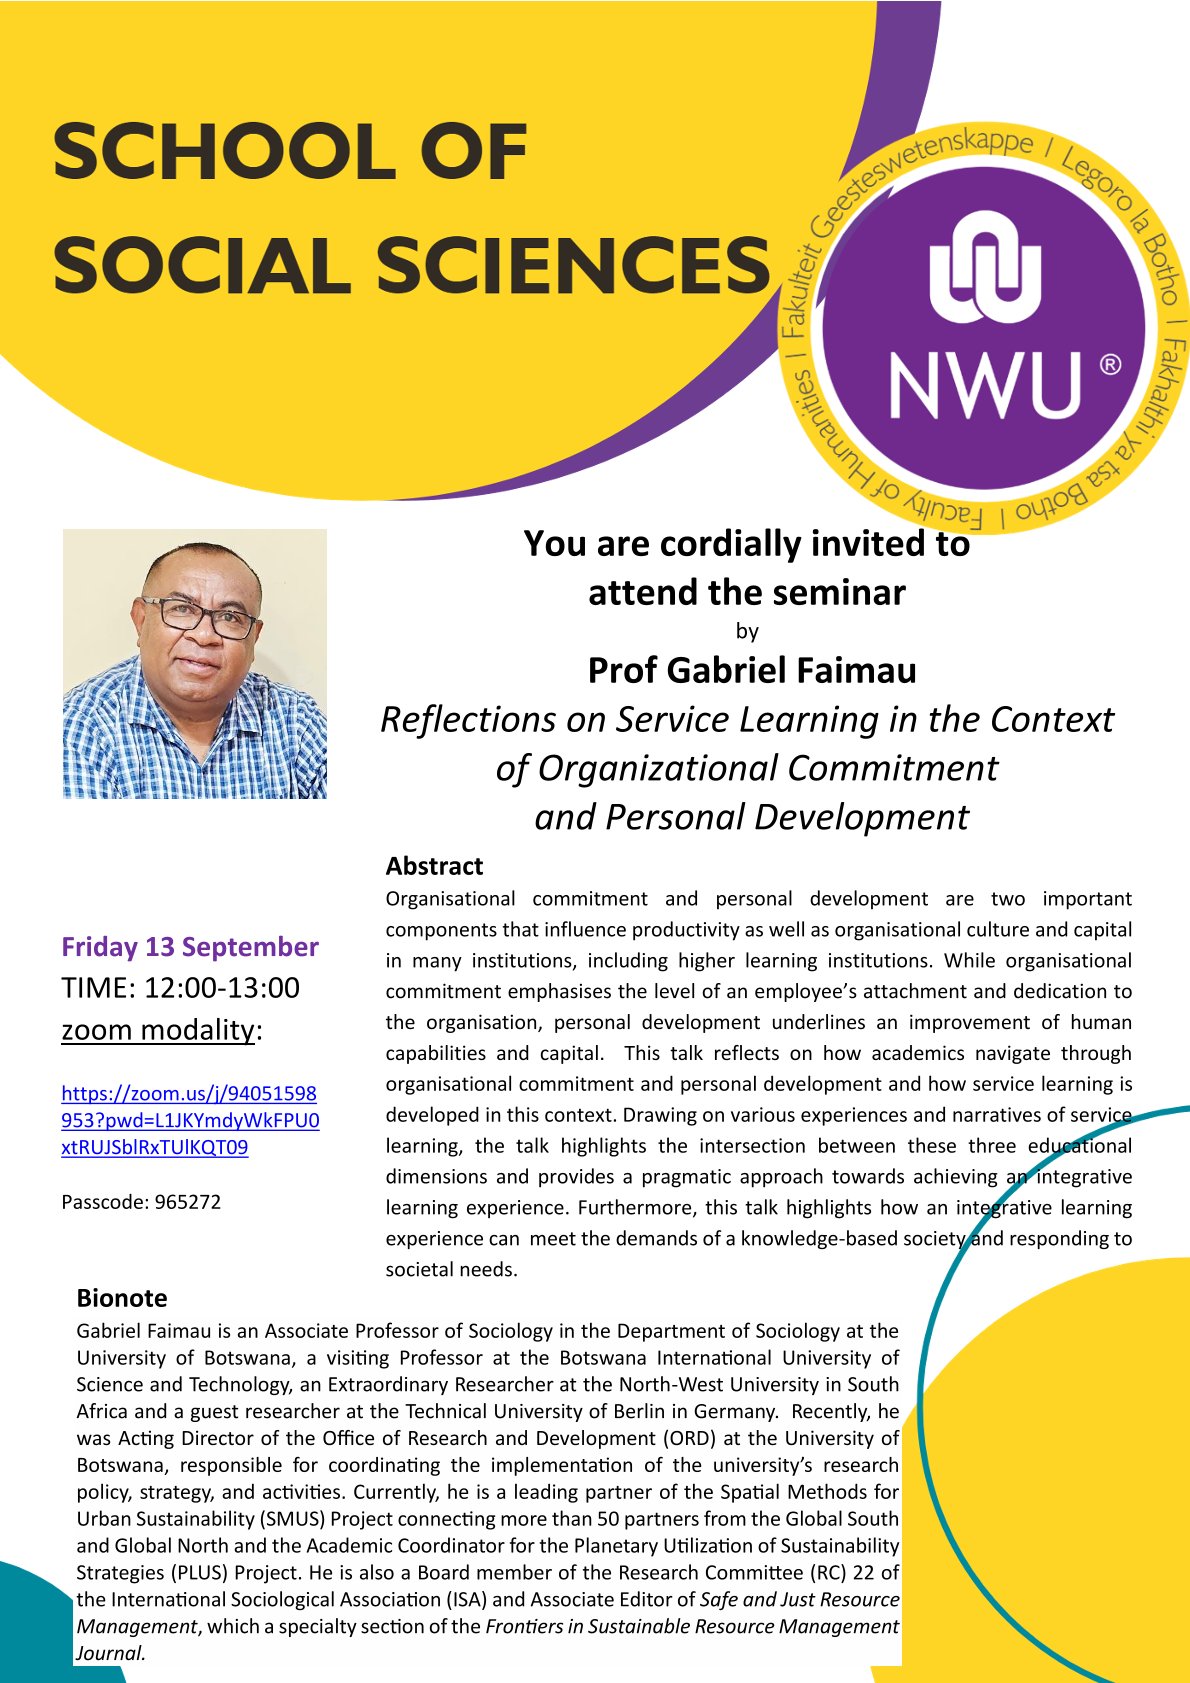 Seminar: Reflections on Service Learning in the Context of Organizational Commitment and Personal Development – Gabriel Faimau